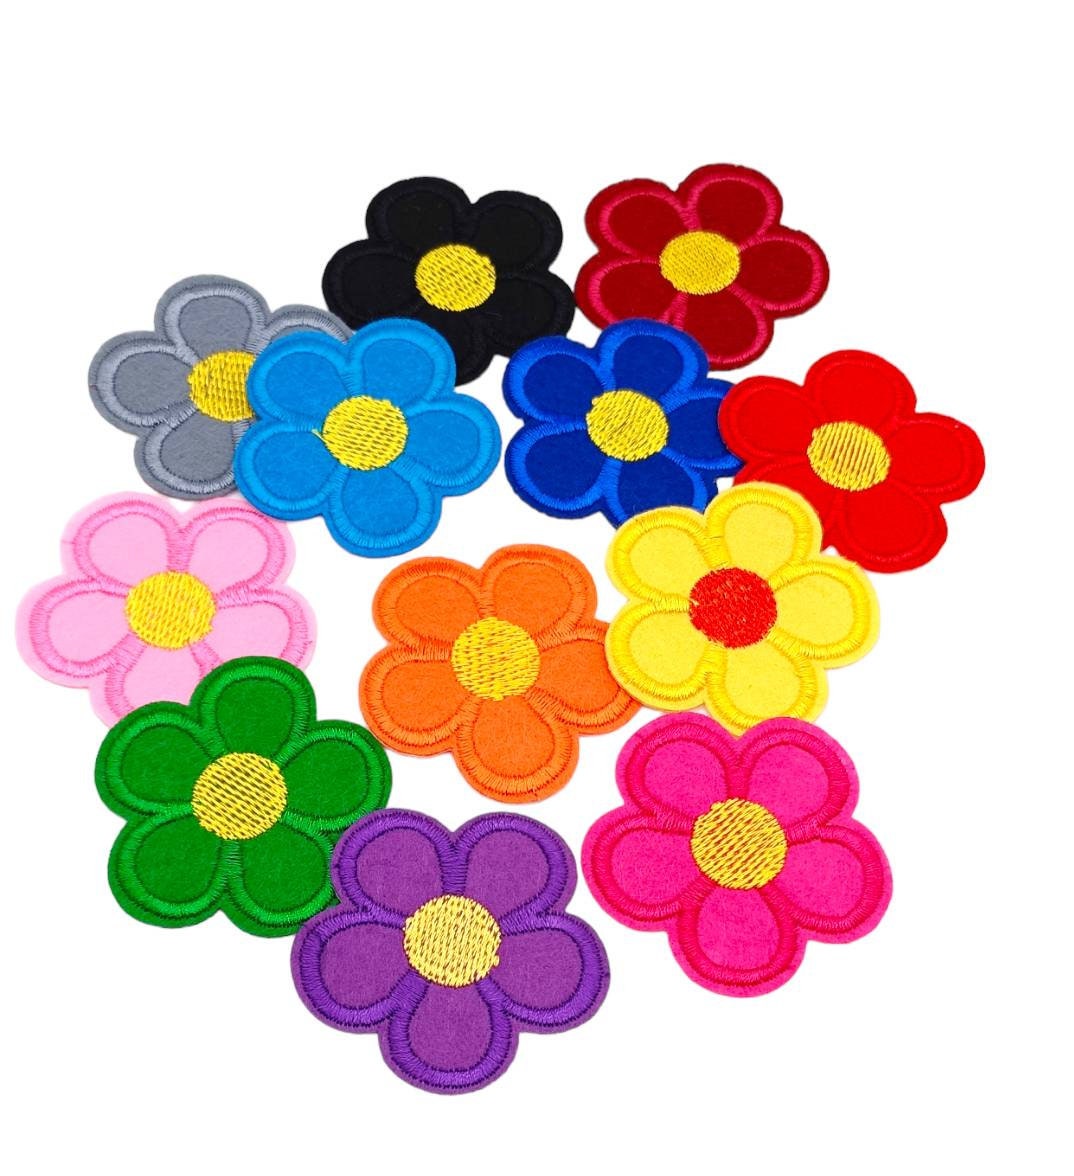 COHEALI 15pcs Black Rose Patch Knee Patches for Pants Knee Patches for  Jeans Flowers Floral Embroidered Appliques Sewing Appliques Flowers  Backpack